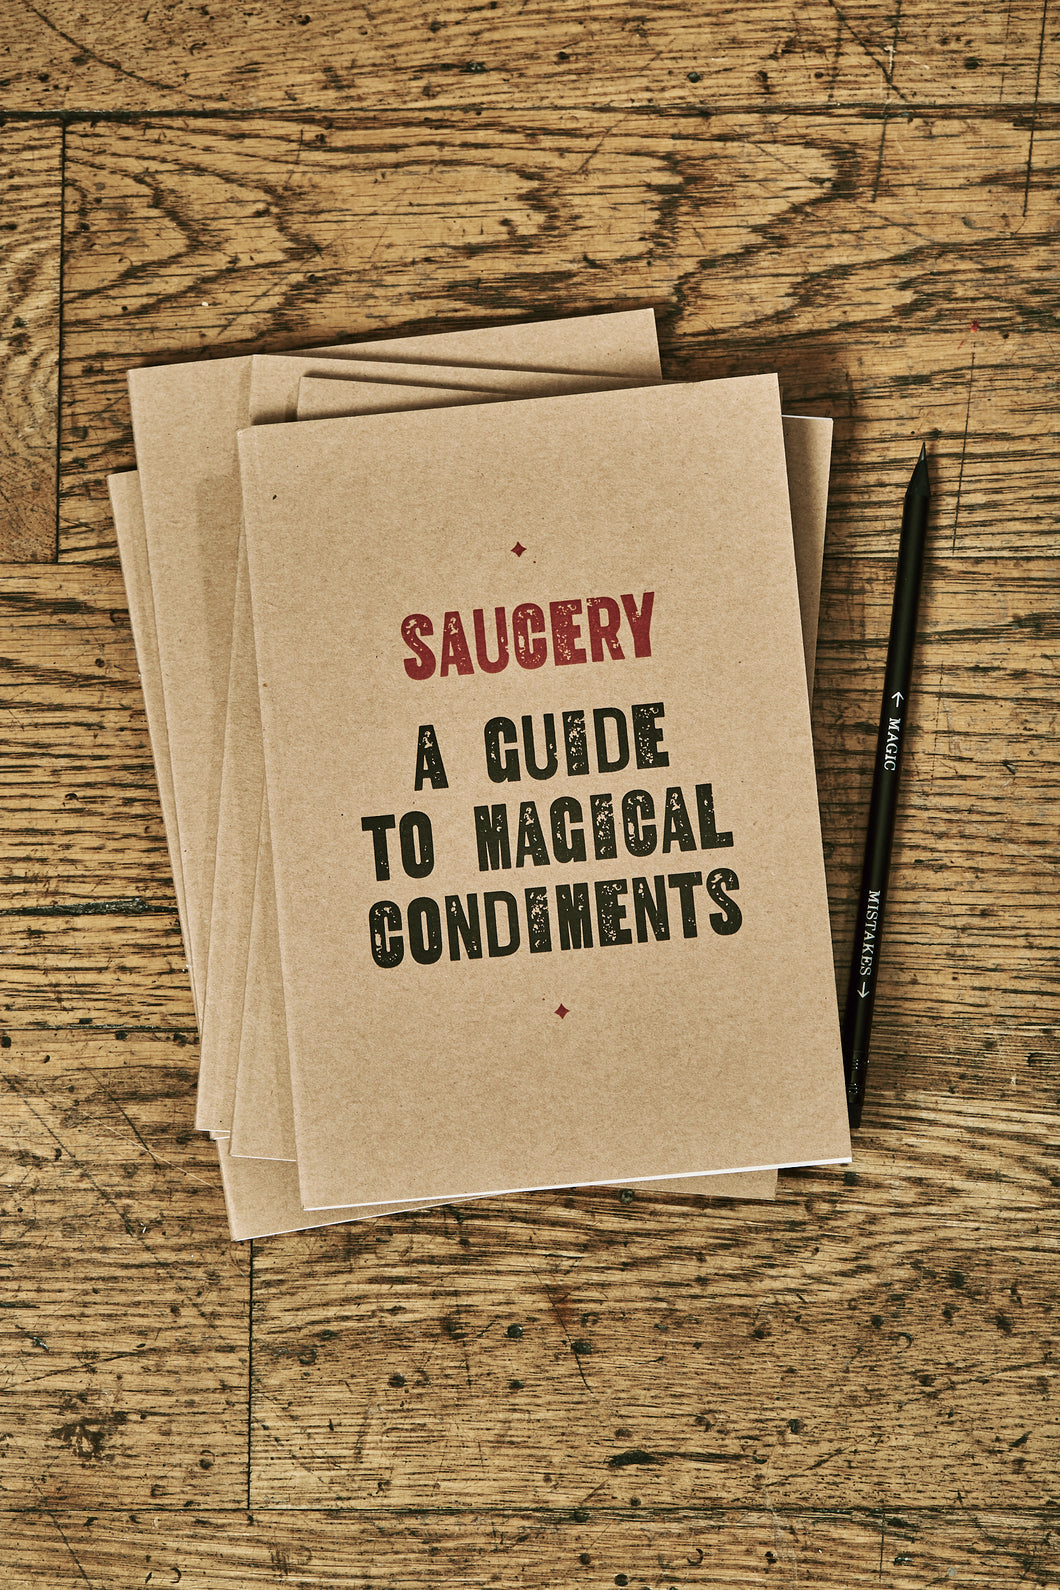 Image shows a few kraft card notebooks in a pile with the top one displaying the slogan 'SAUCERY: A GUIDE TO MAGICAL CONDIMENTS'. Notebooks are shown with a Word Wand pencil.